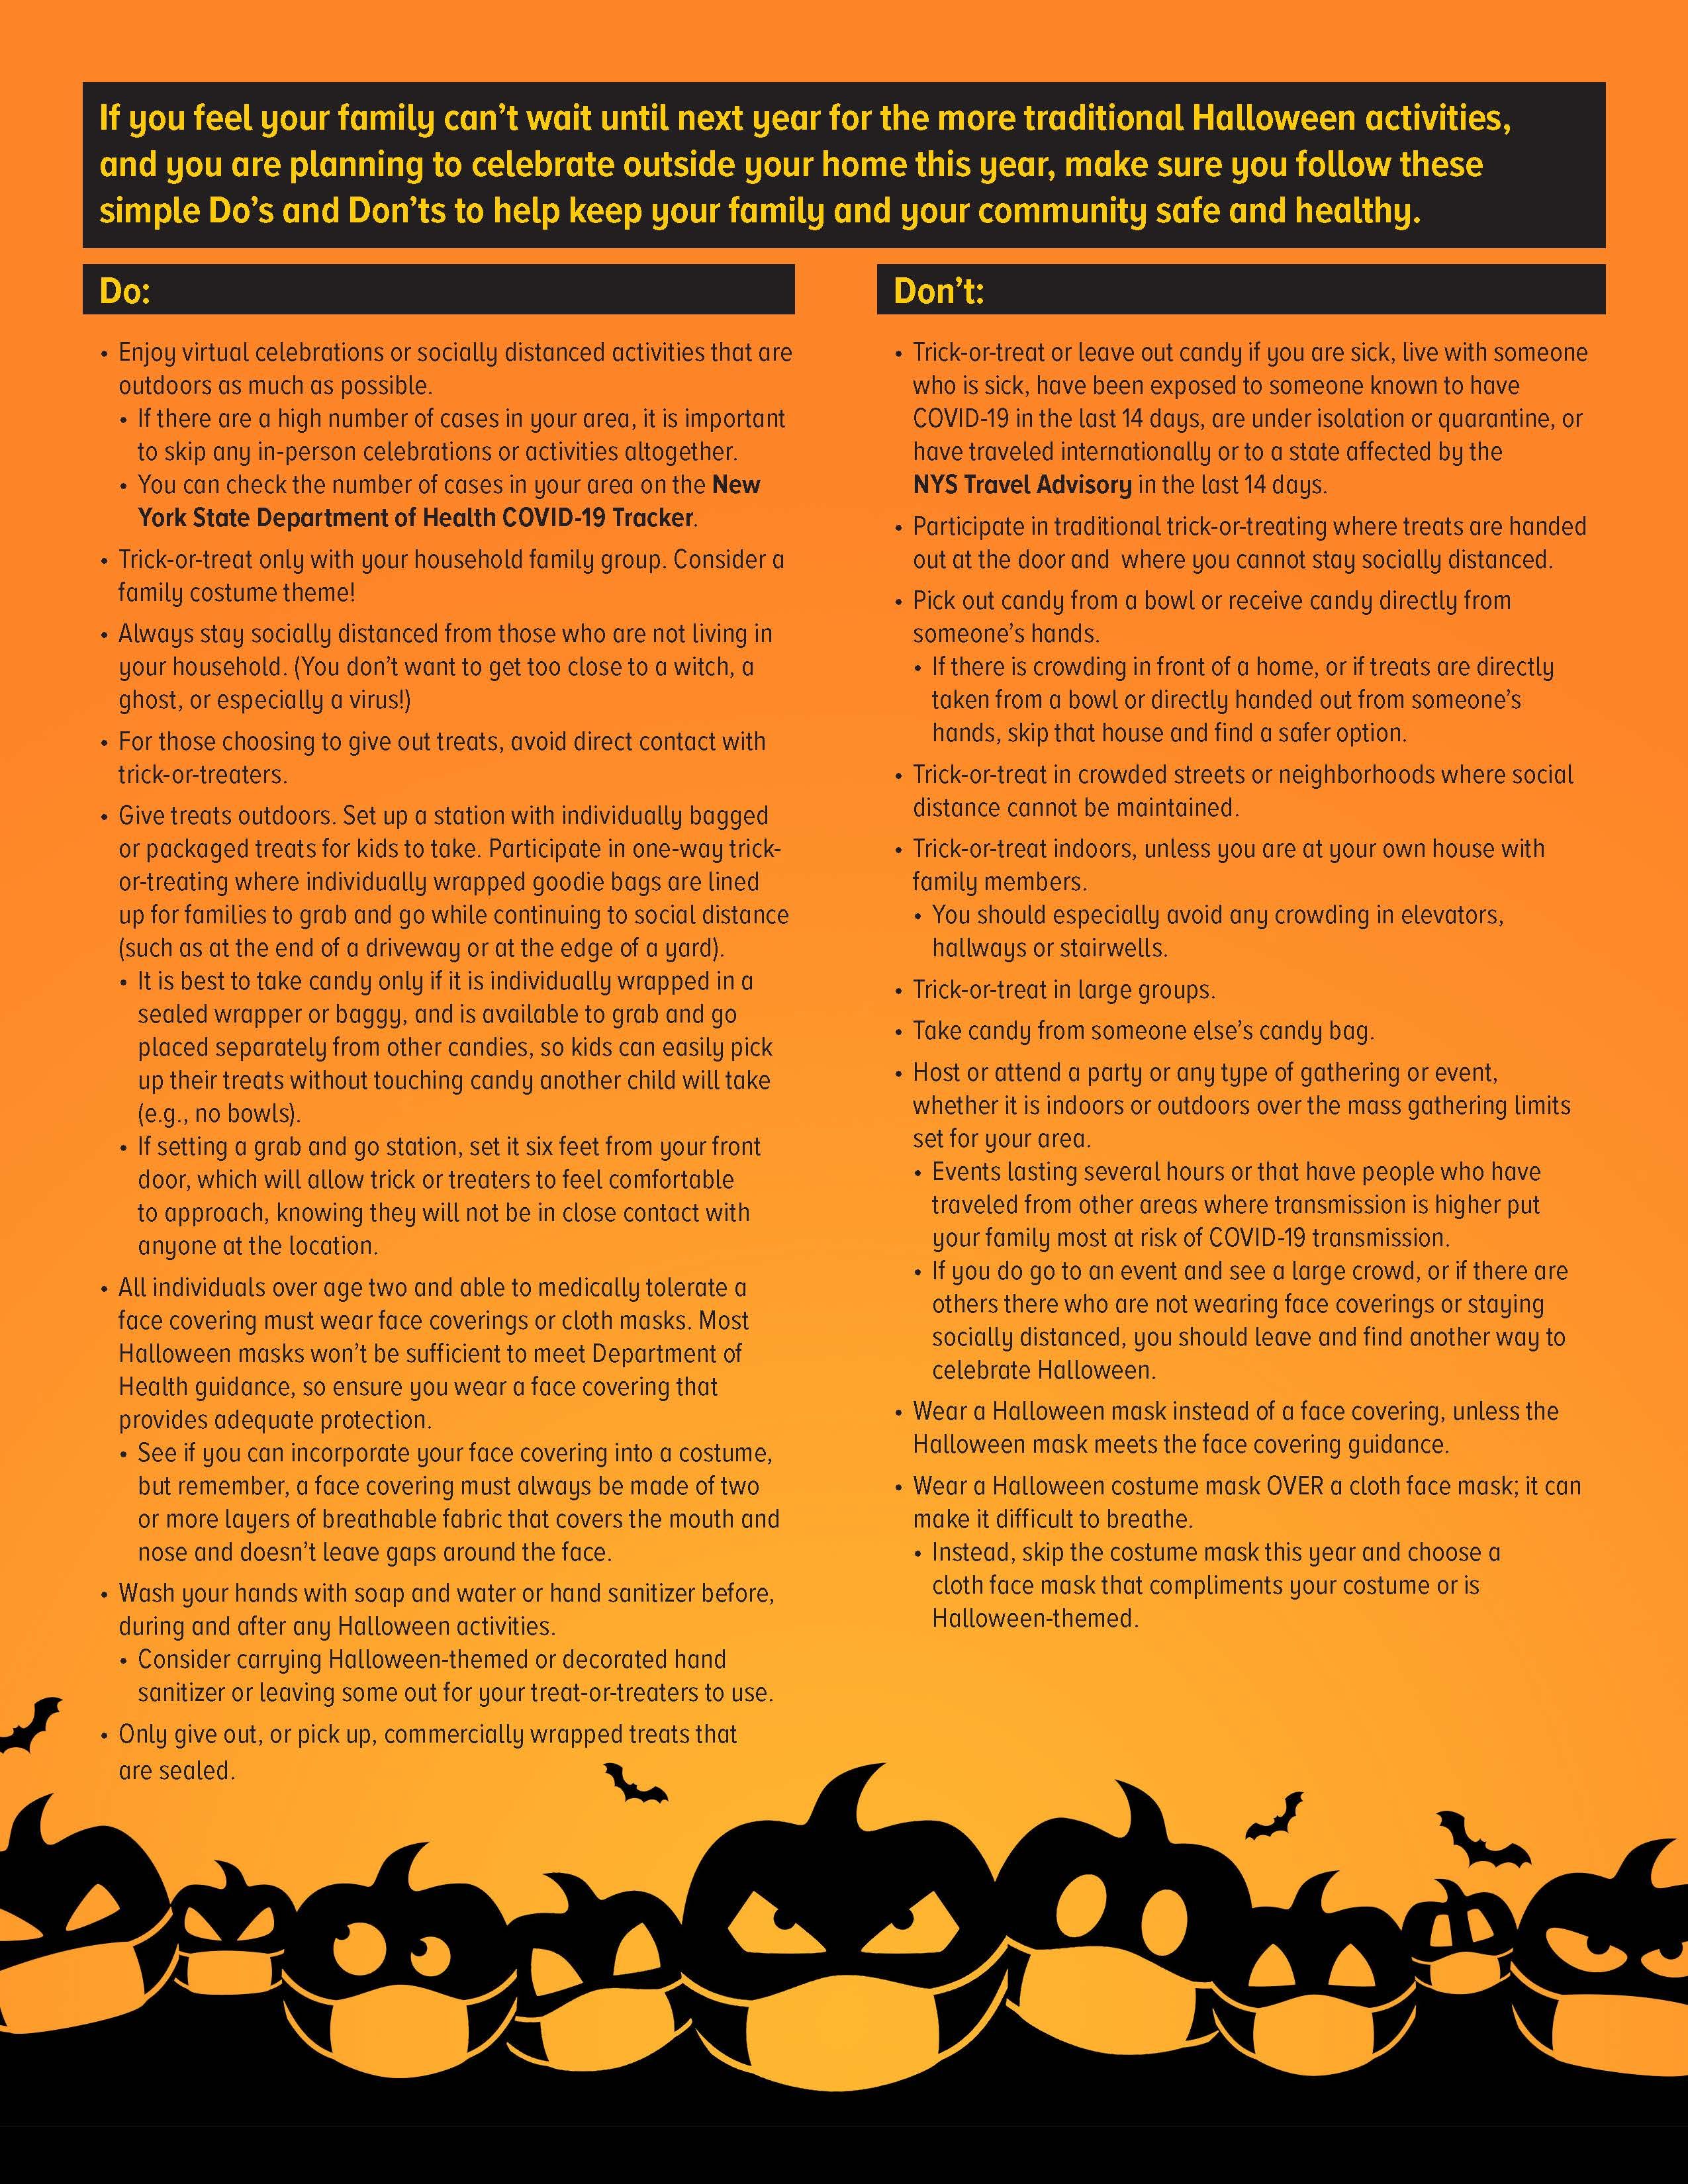 info graphic on how to stay safe when tricker-treating page 2